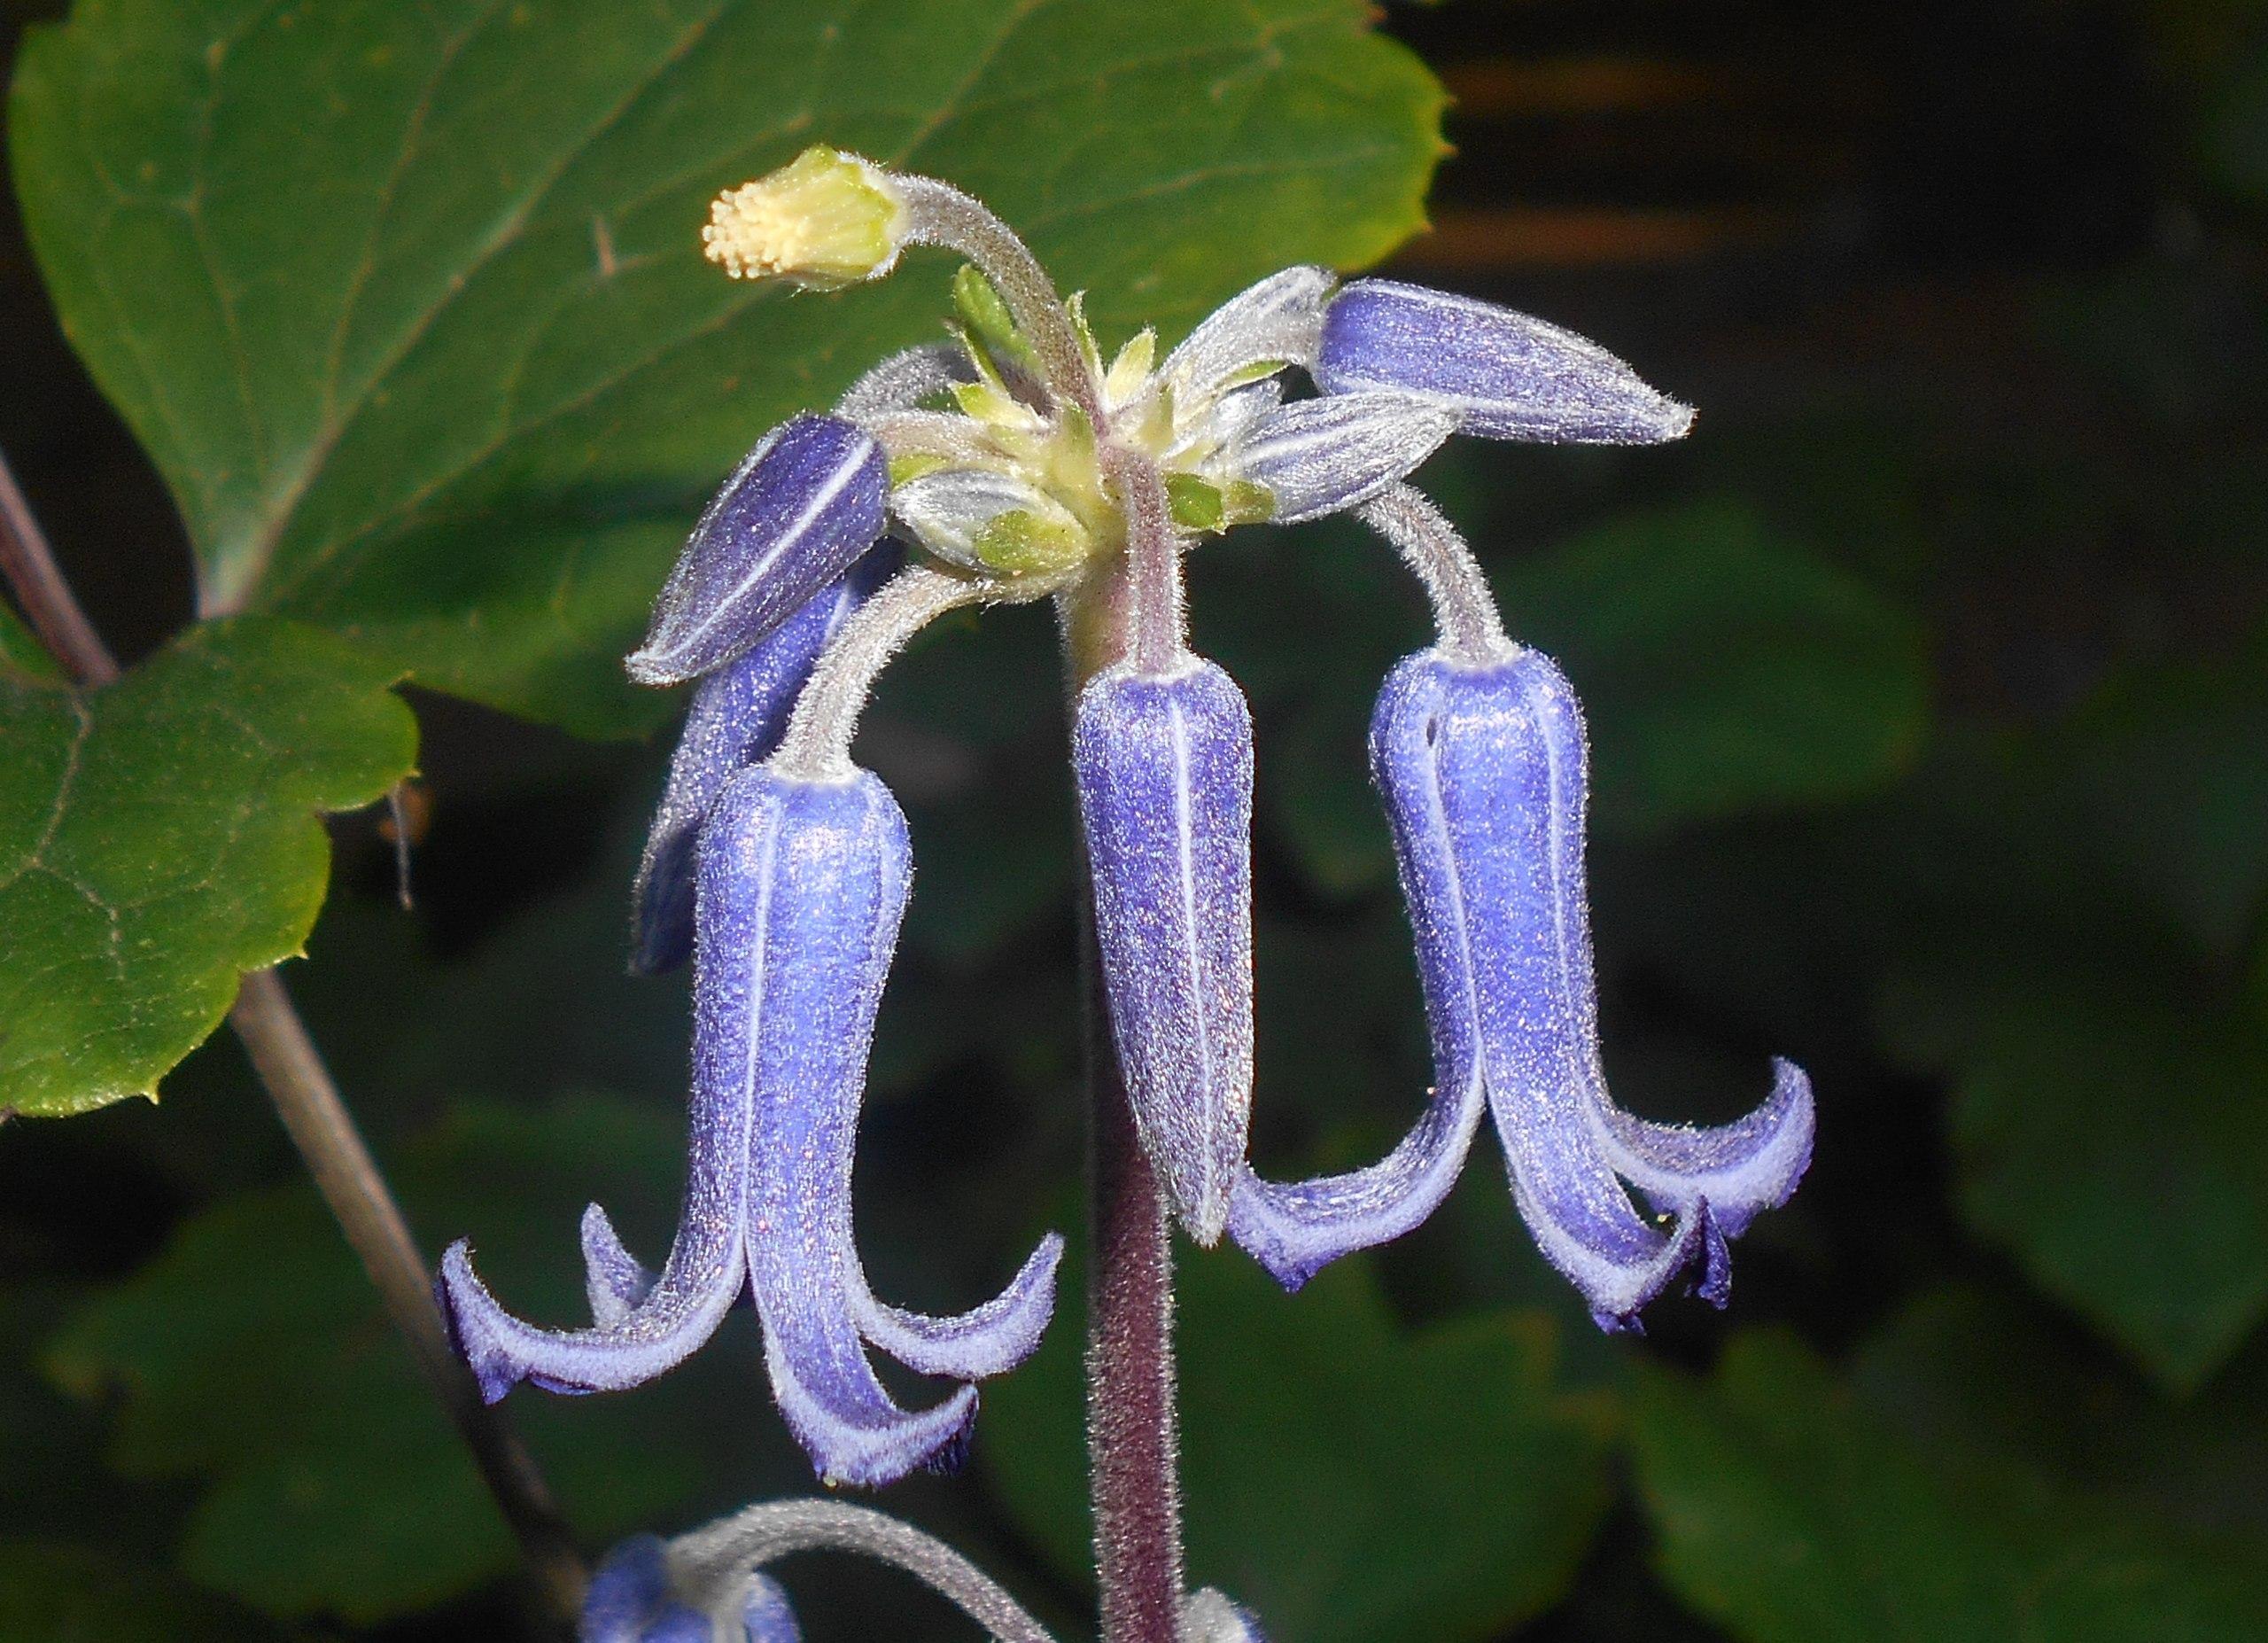 Blue-white flower with buds, white hair, lime sepals, brown stems, burgundy pedicel.